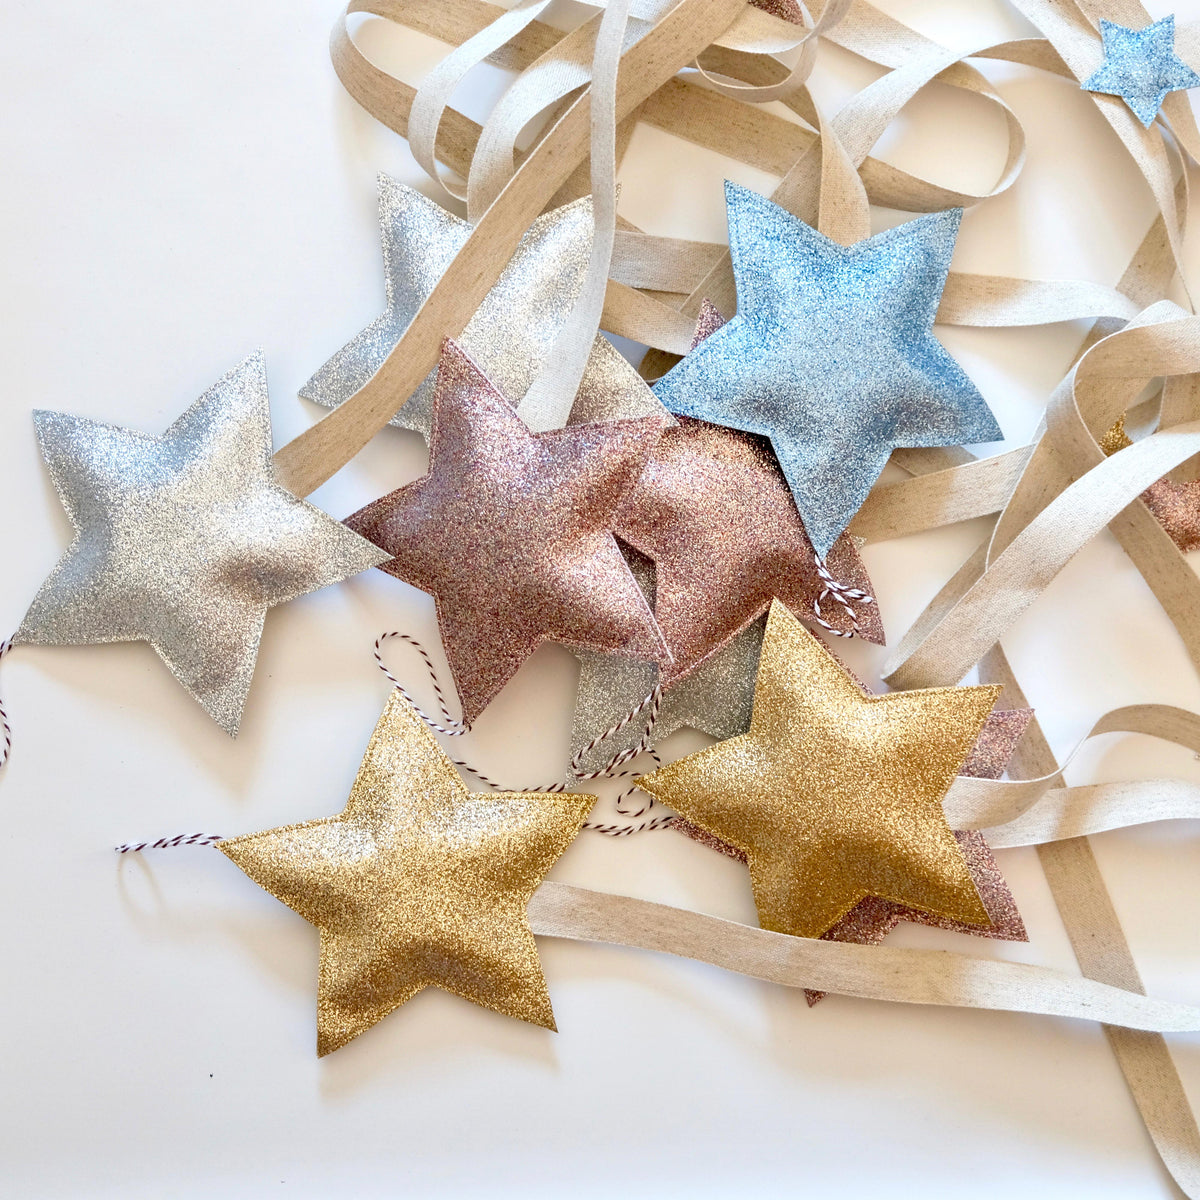 Our stylish star shaped hair clip hangers are available in silver, gold, pink or blue glitter fabric.